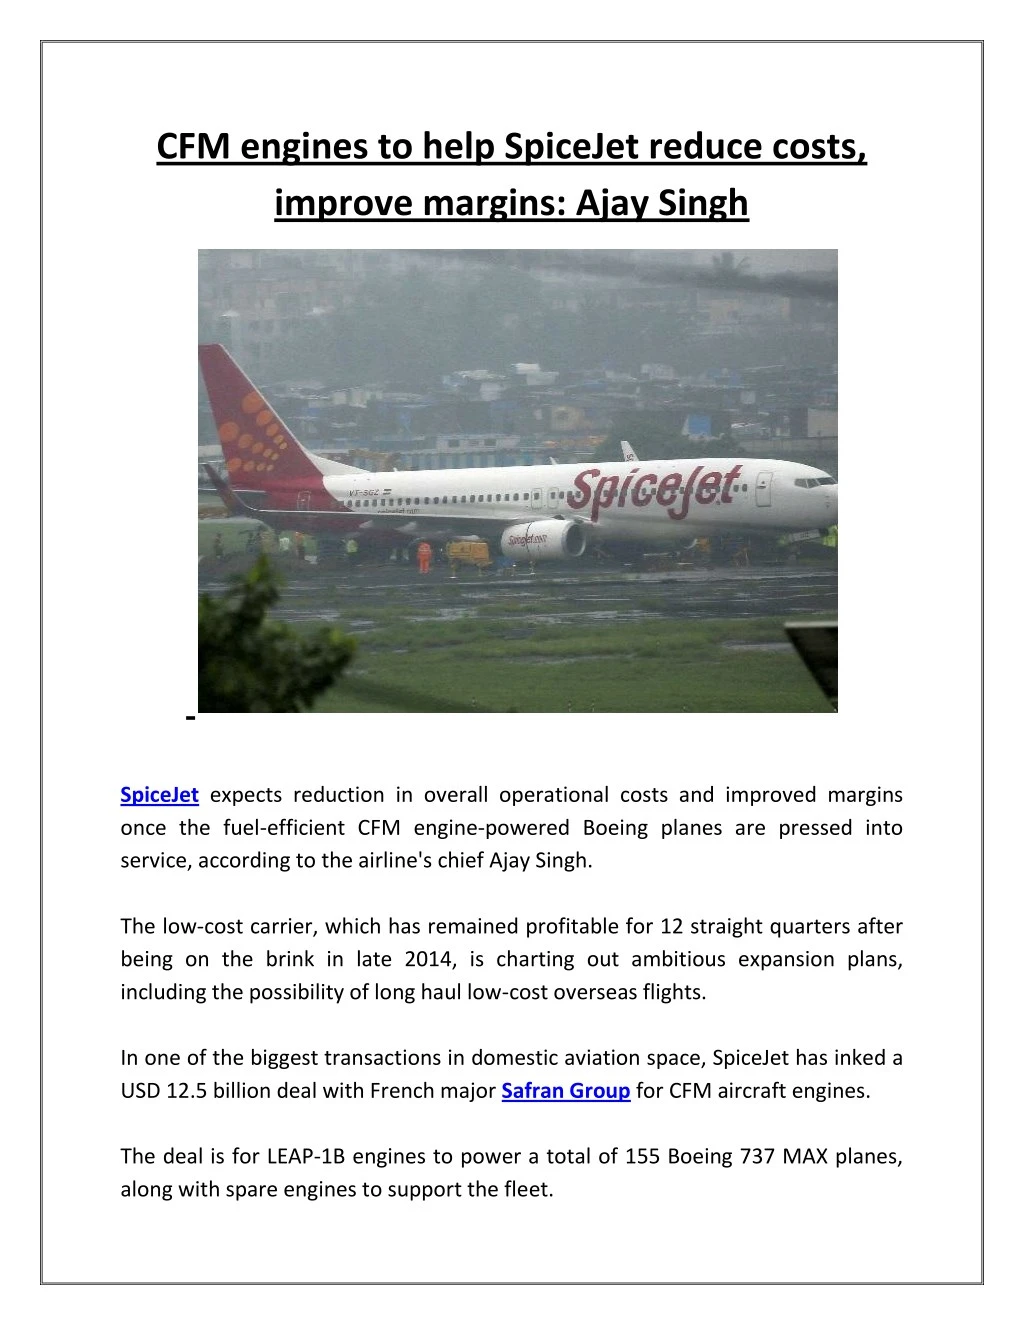 cfm engines to help spicejet reduce costs improve